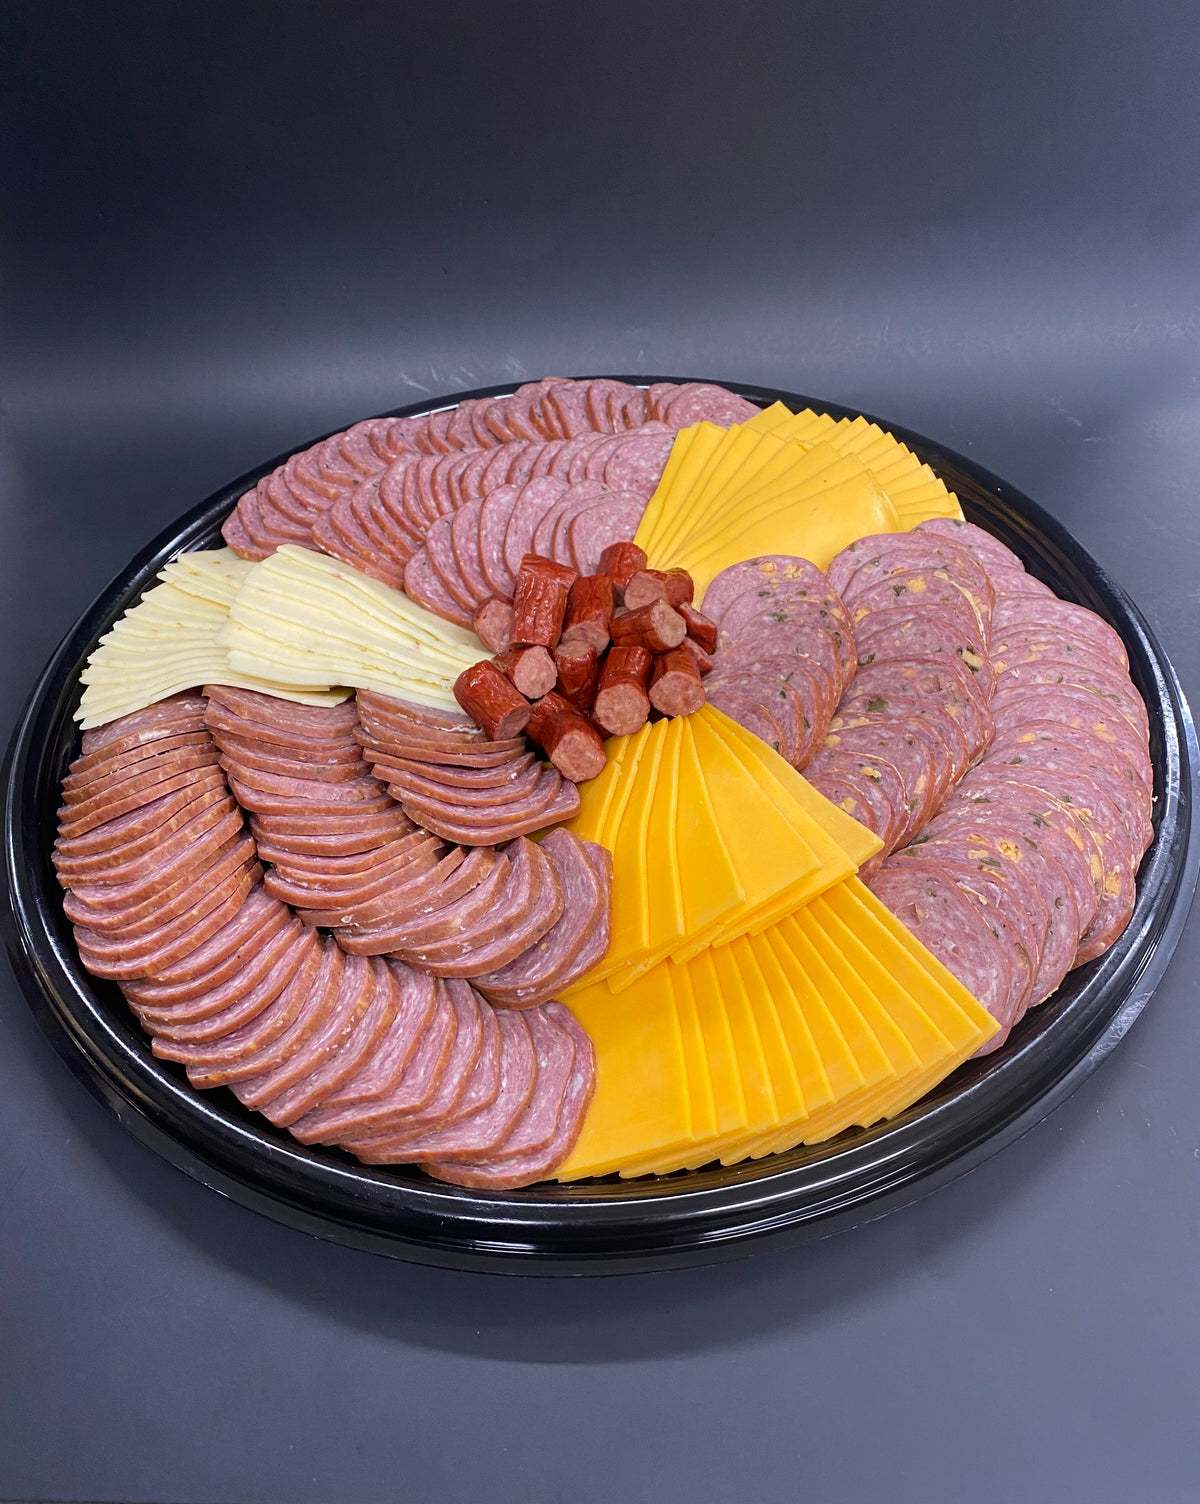 Sausage and Cheese Platter - In Store Only